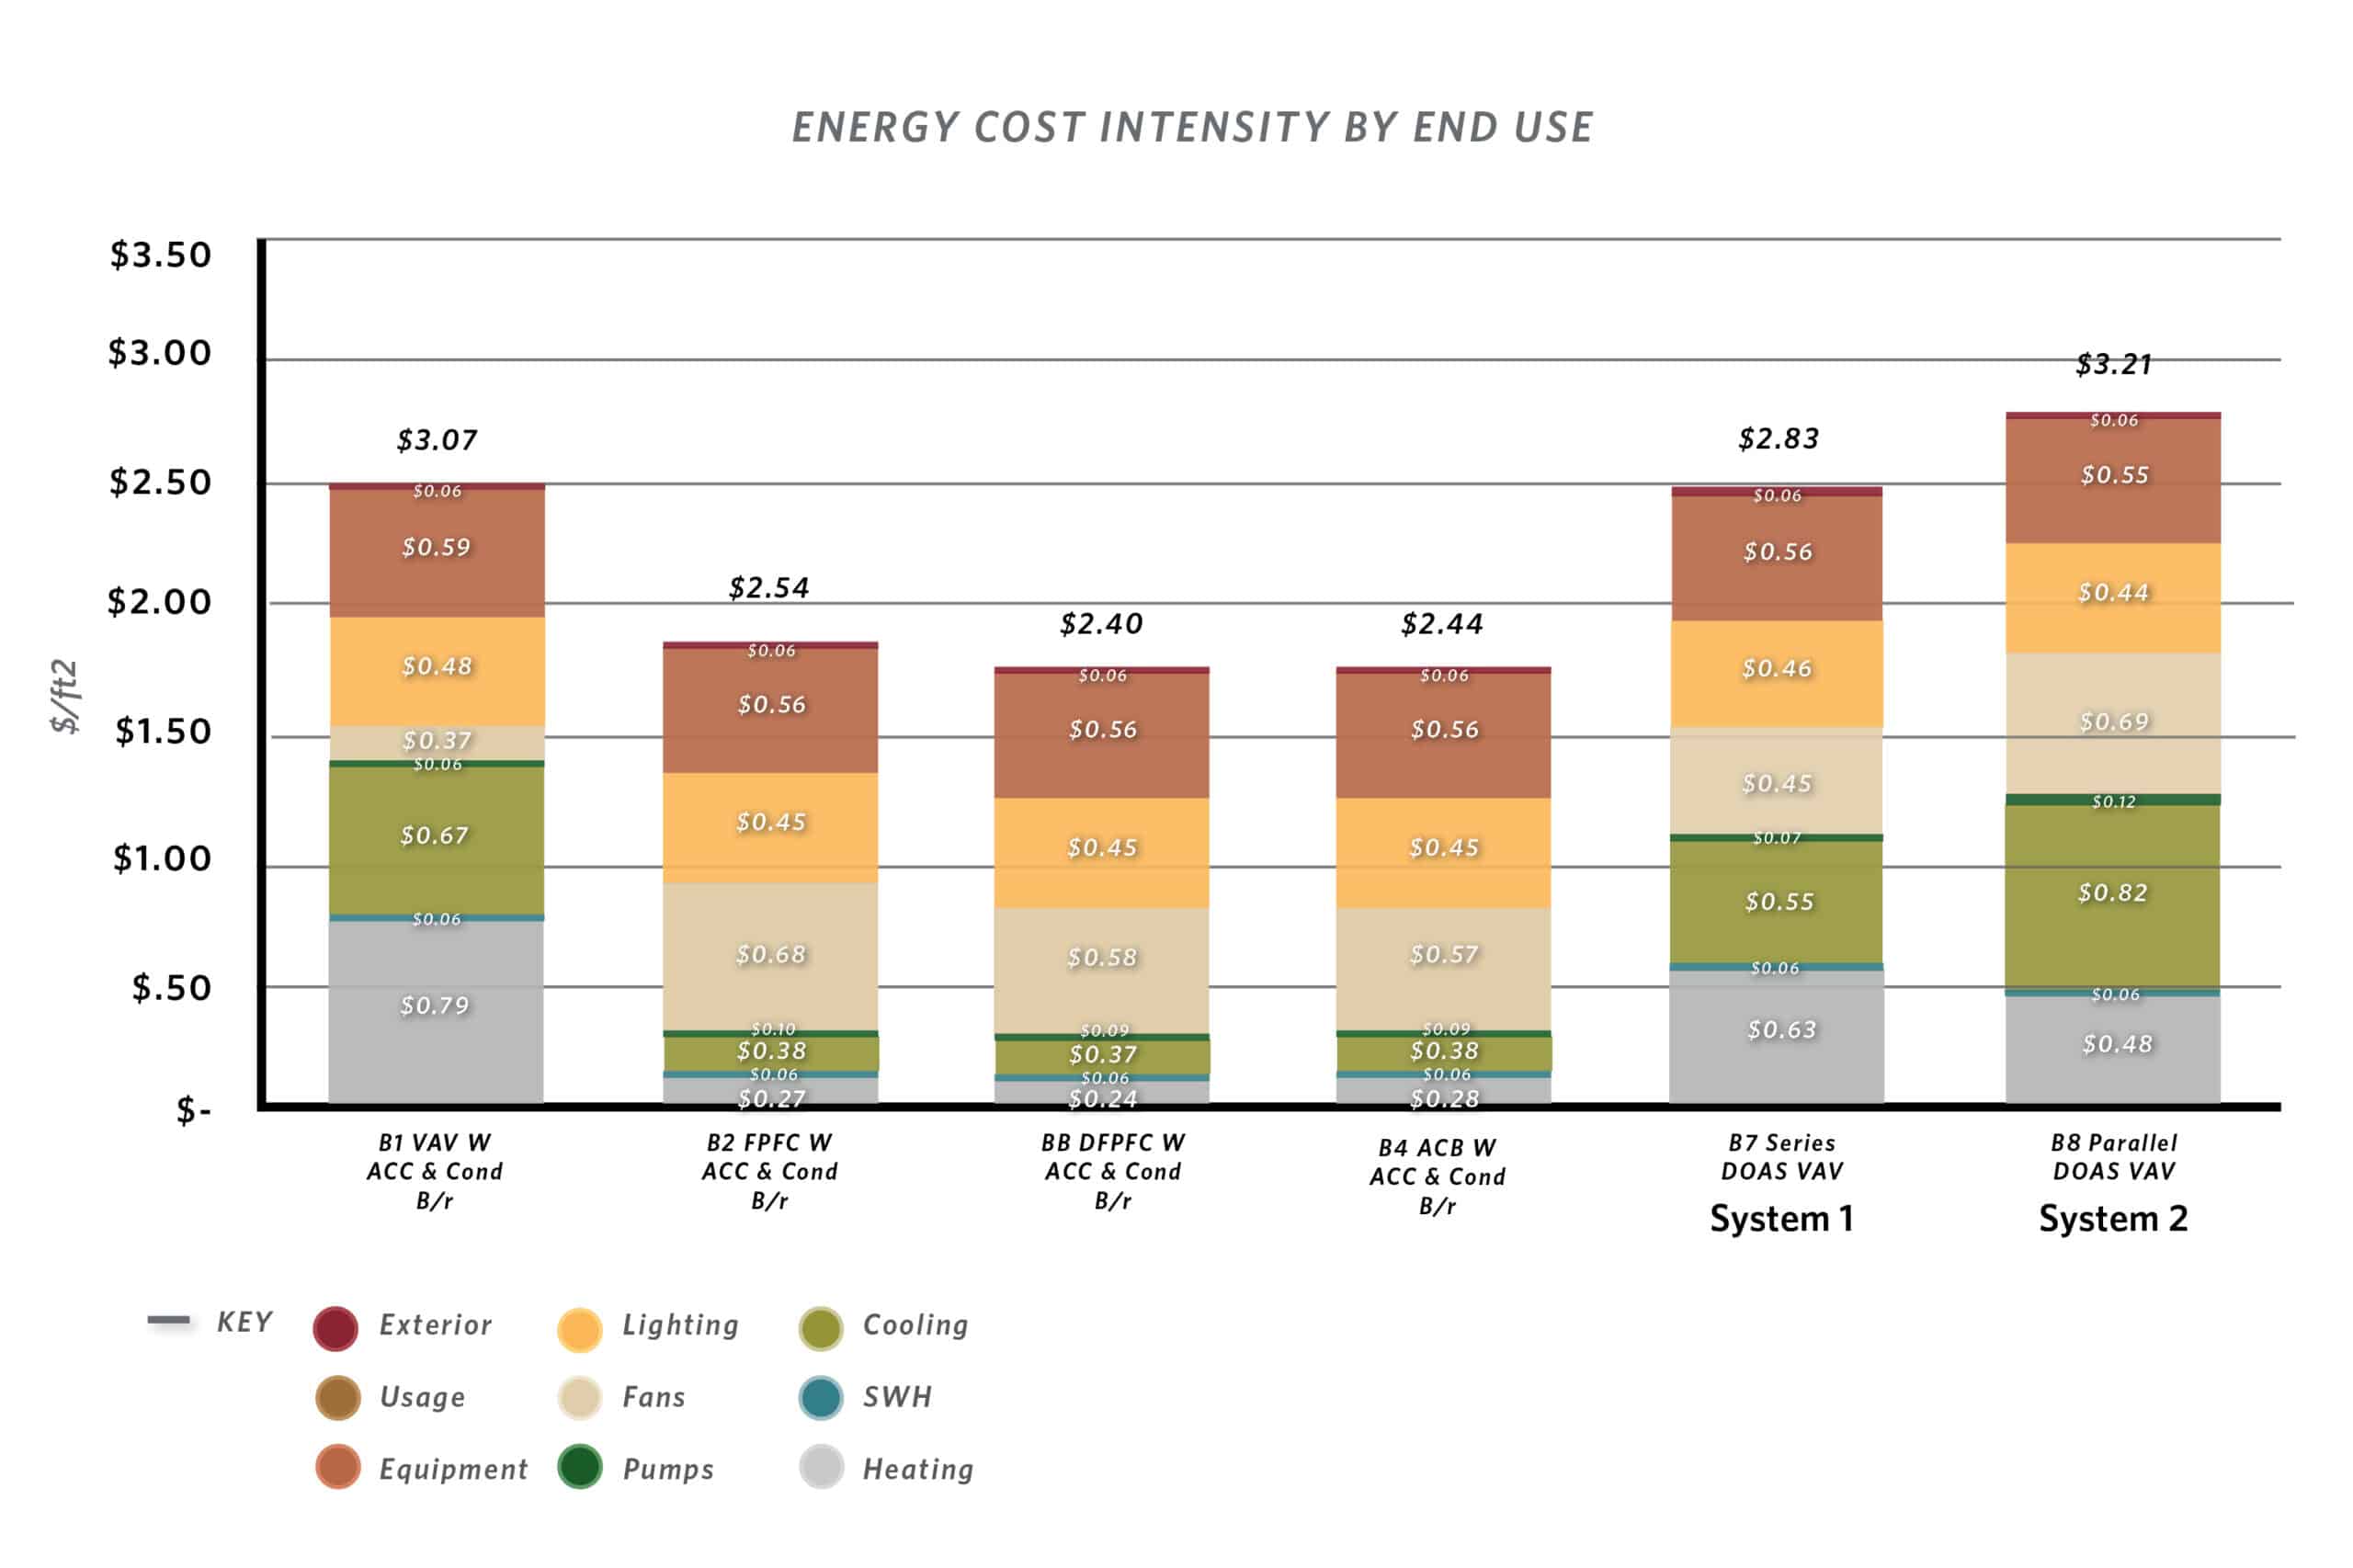 A bar chart showing Energy Cost Intensity by End Use